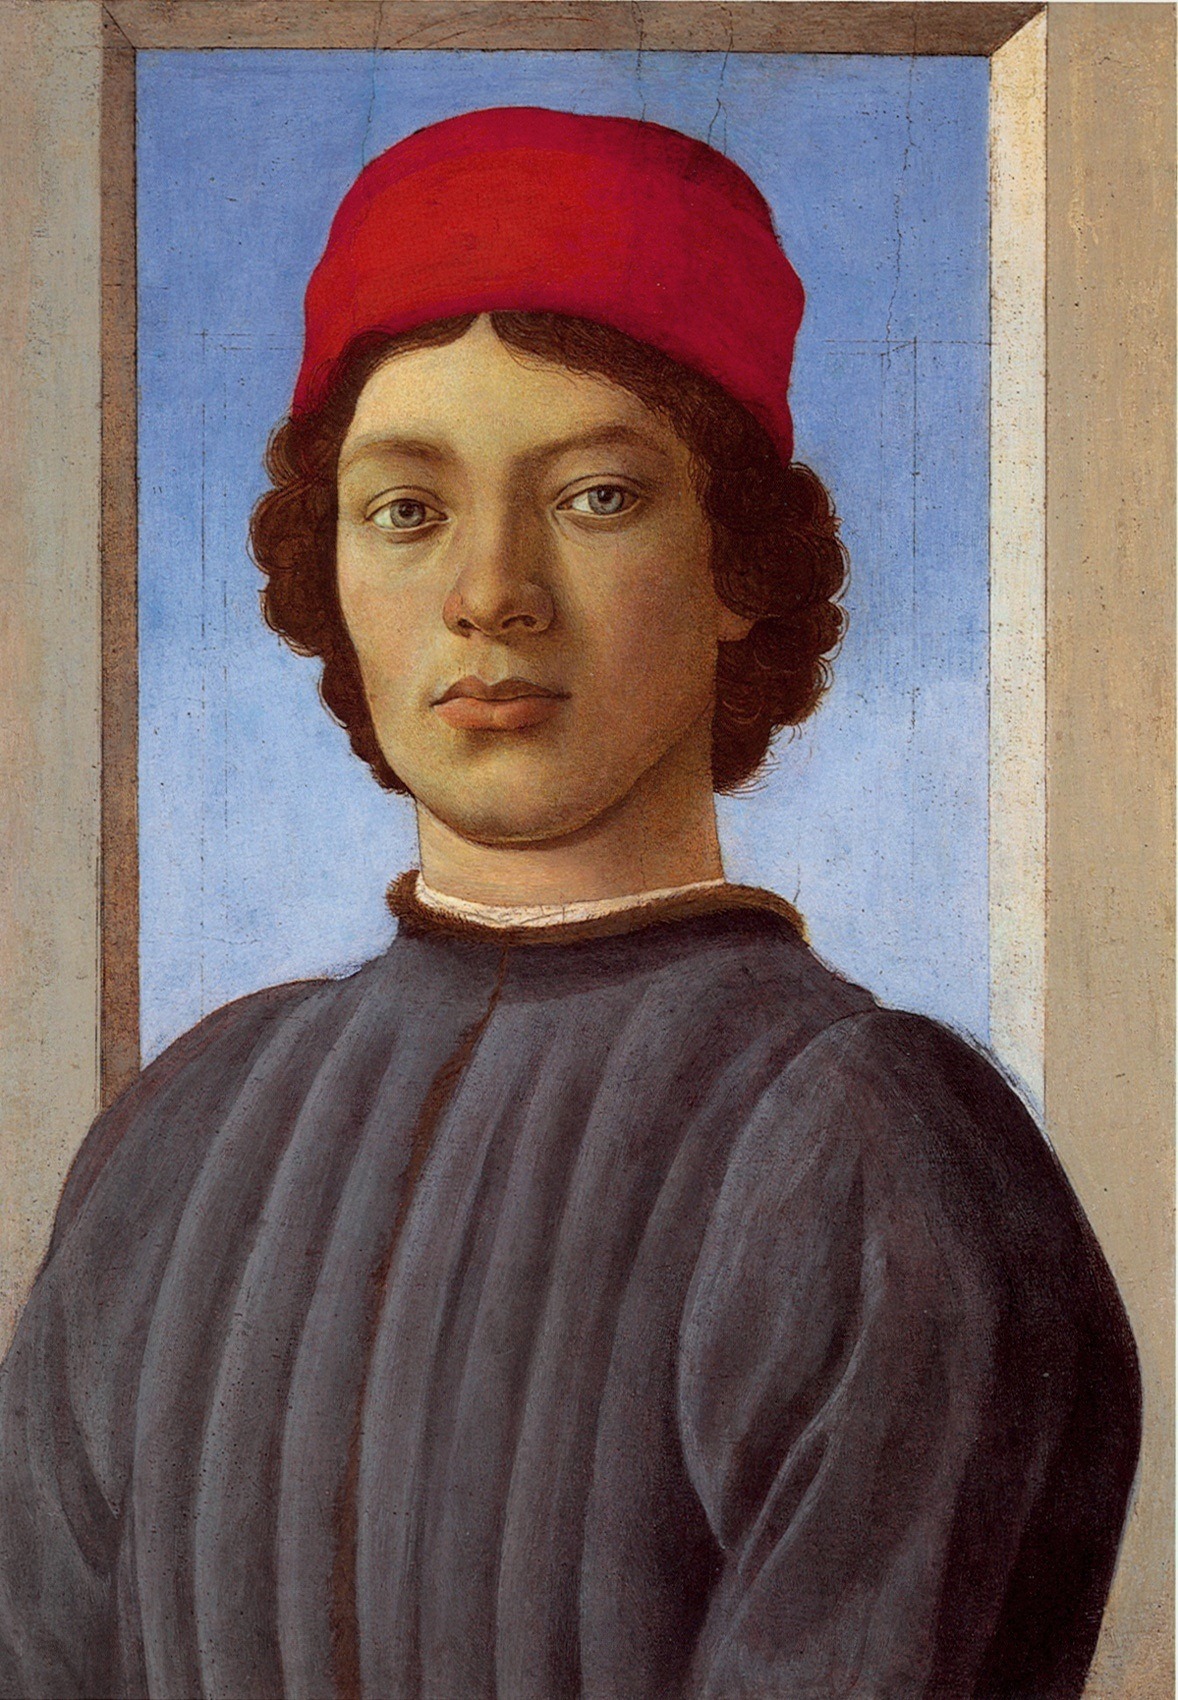 Portrait of a Young Man, 1423 - 1425 - Masaccio - WikiArt.org